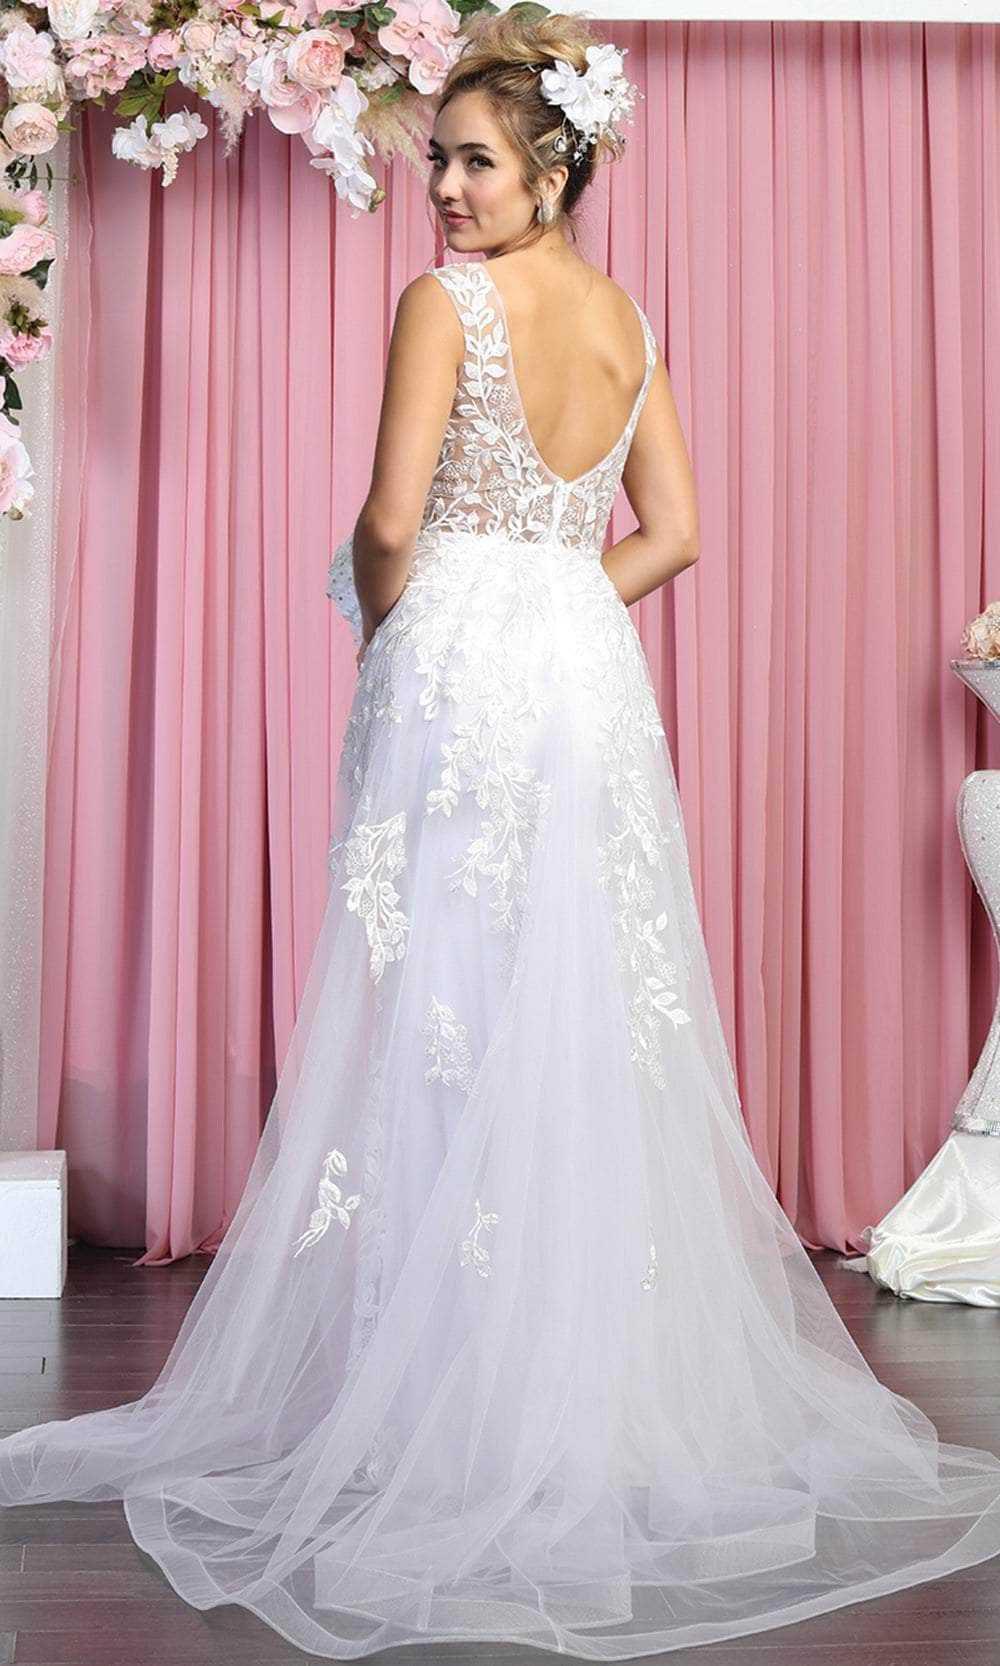 May Queen, May Queen RQ7904 - Sleeveless V-neck Wedding Gown